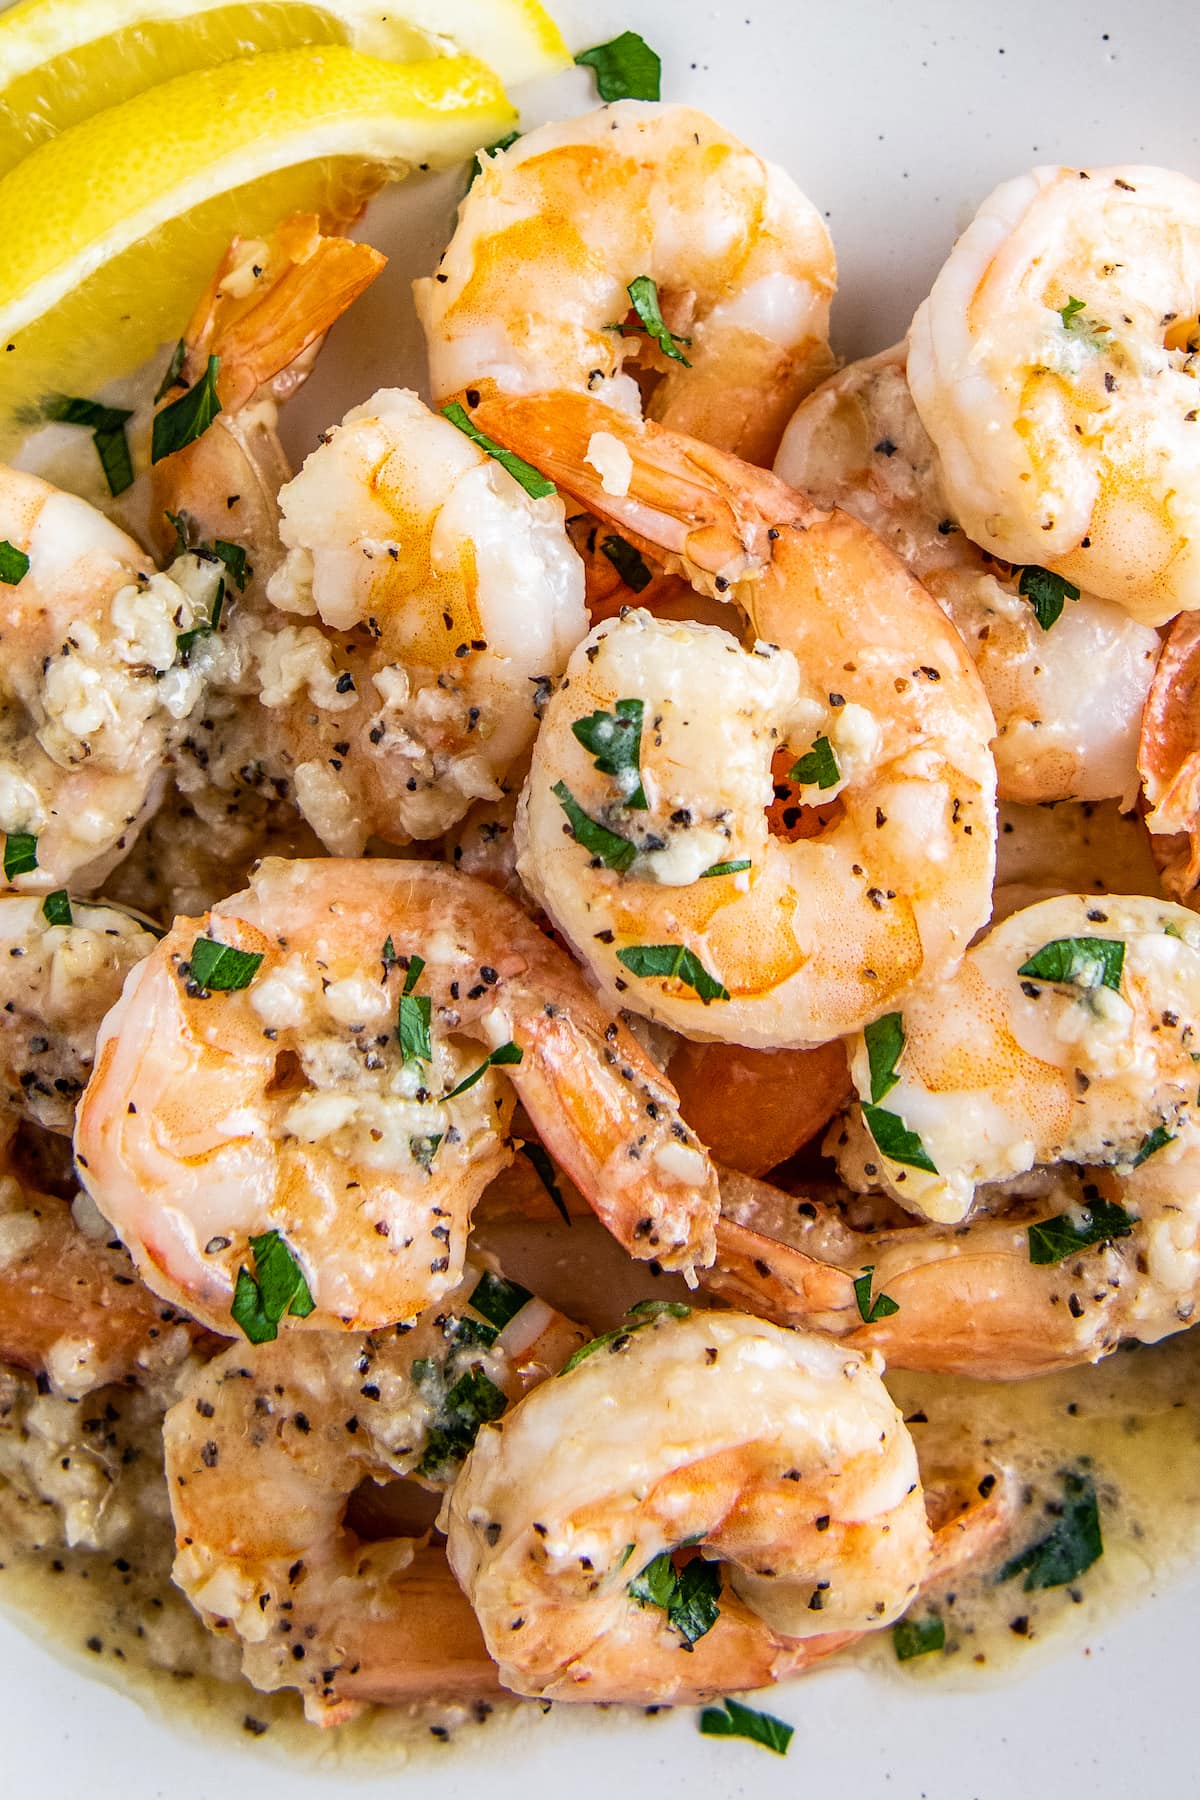 A plate with garlic shrimp in a lemon butter sauce with parsley on top.